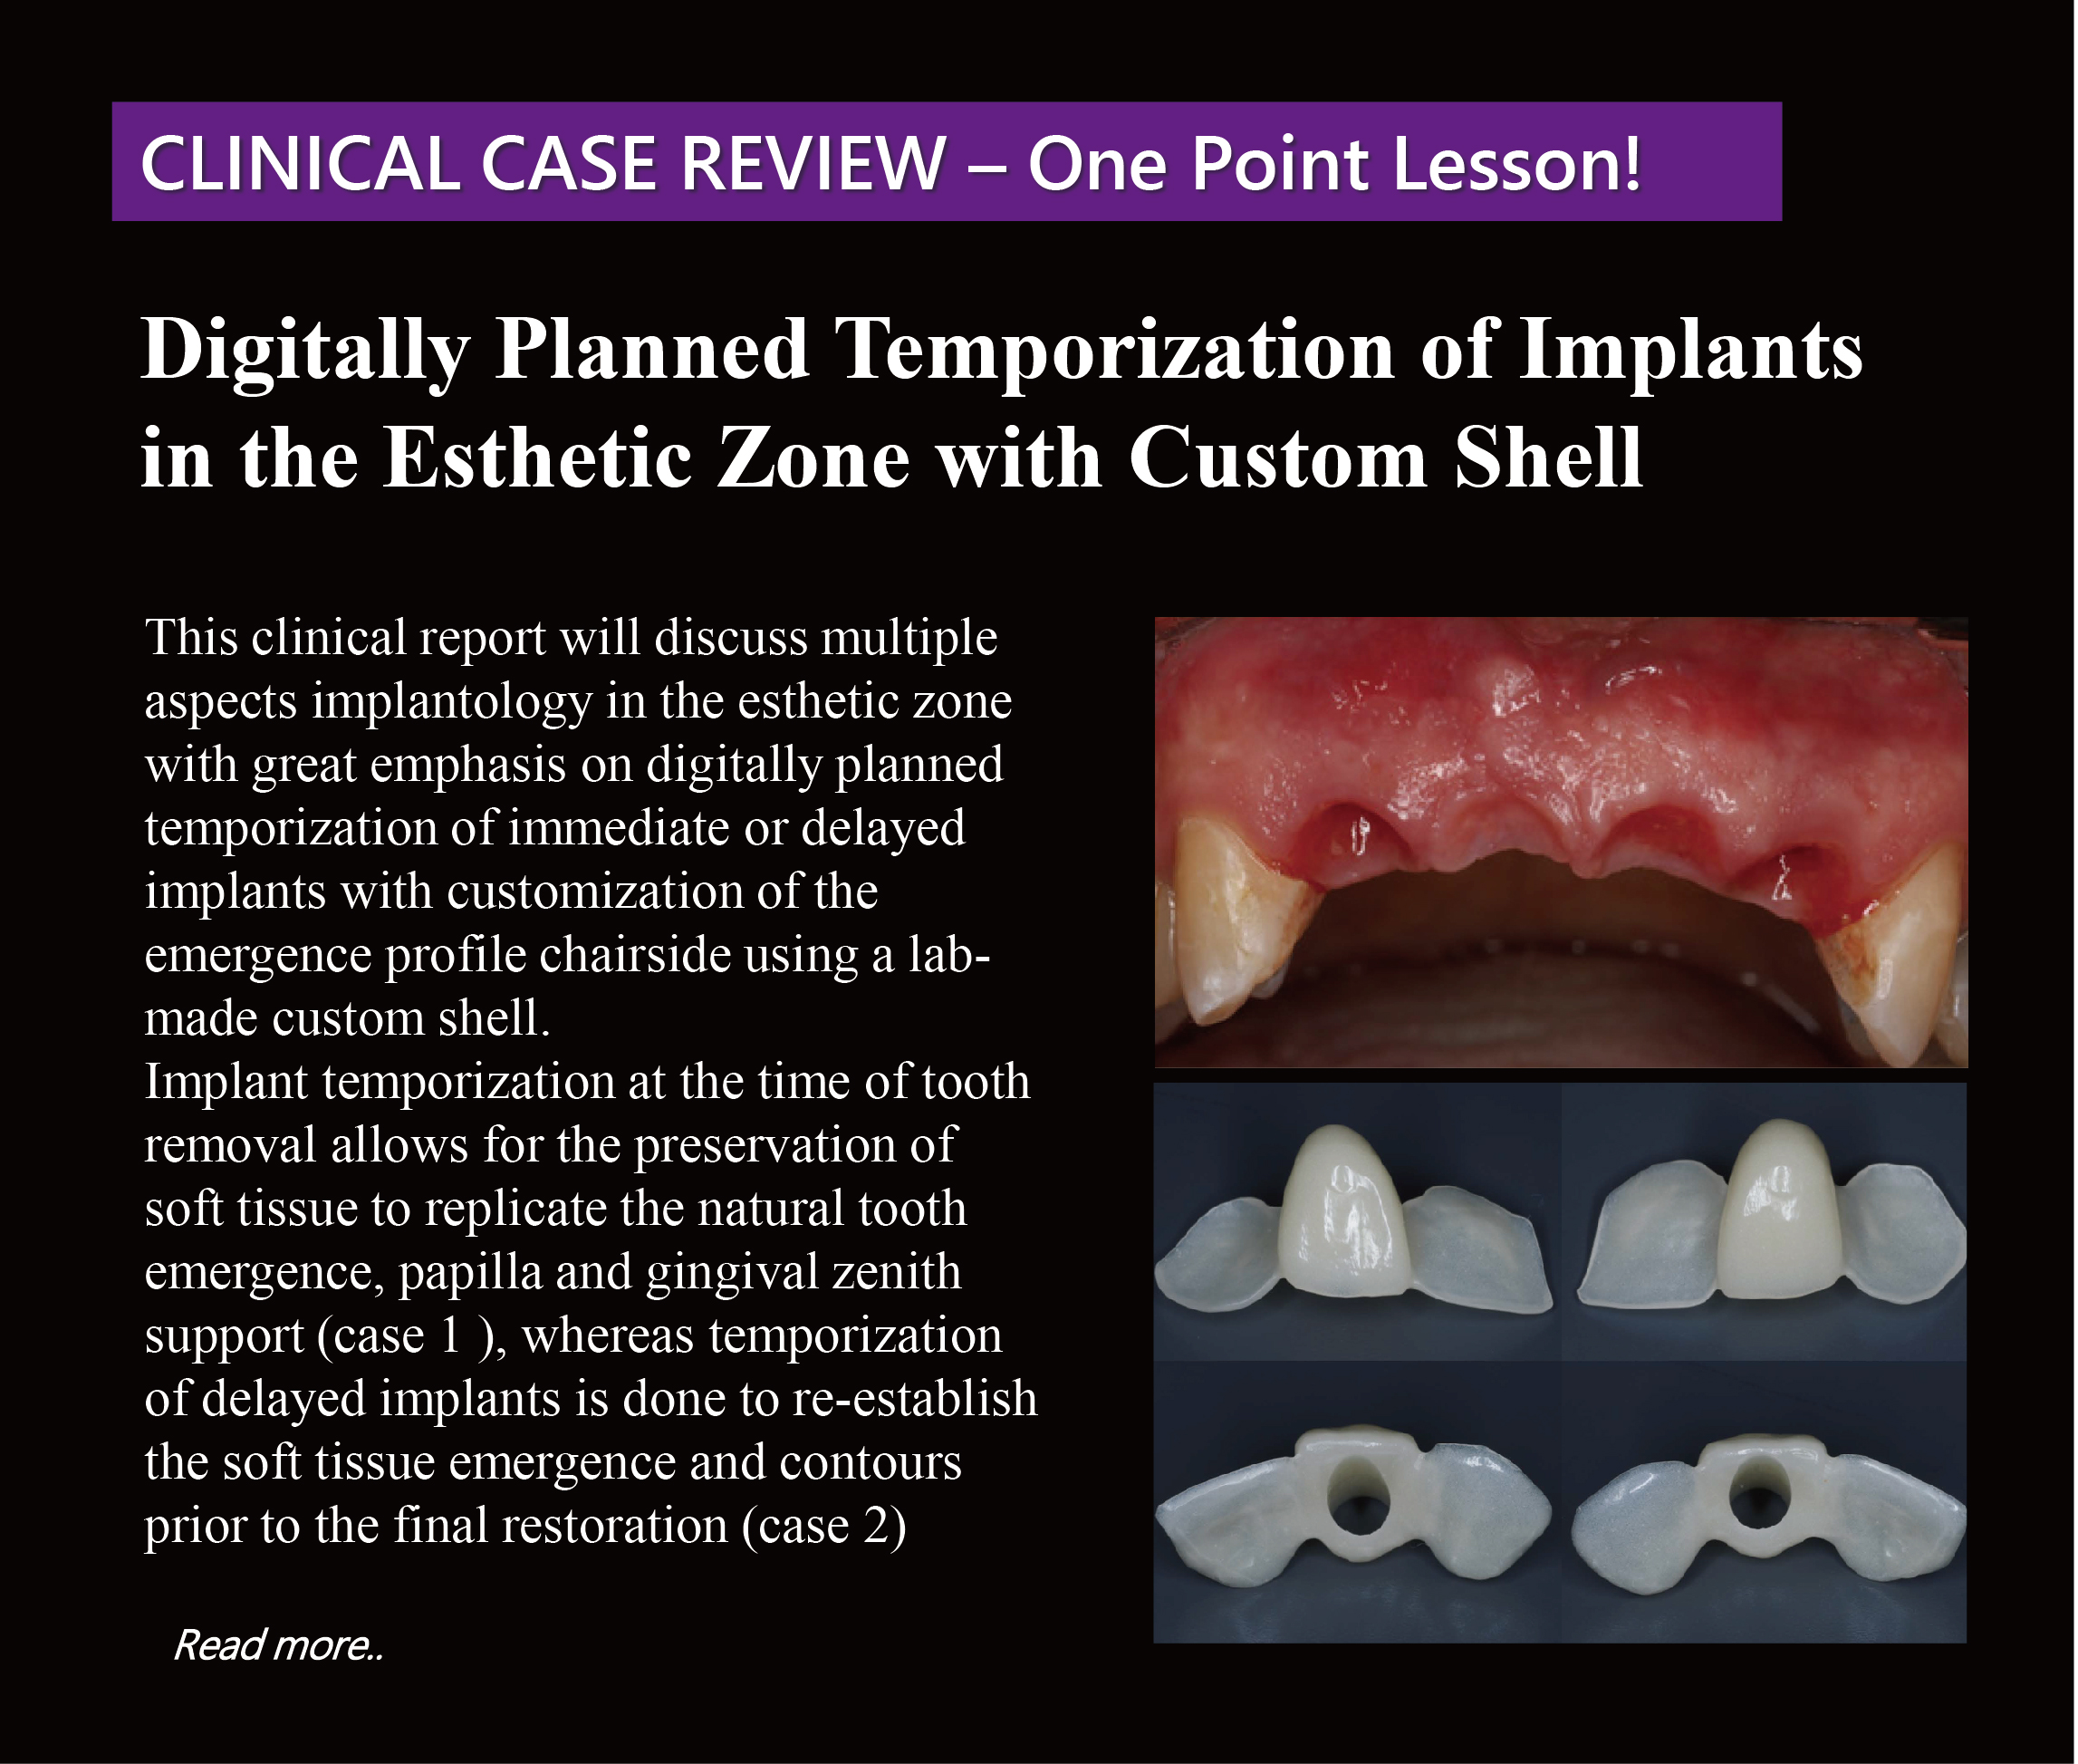 Case Review-Digitally Planned Temporization of Implants in the Esthetic Zone with Custom Shell 